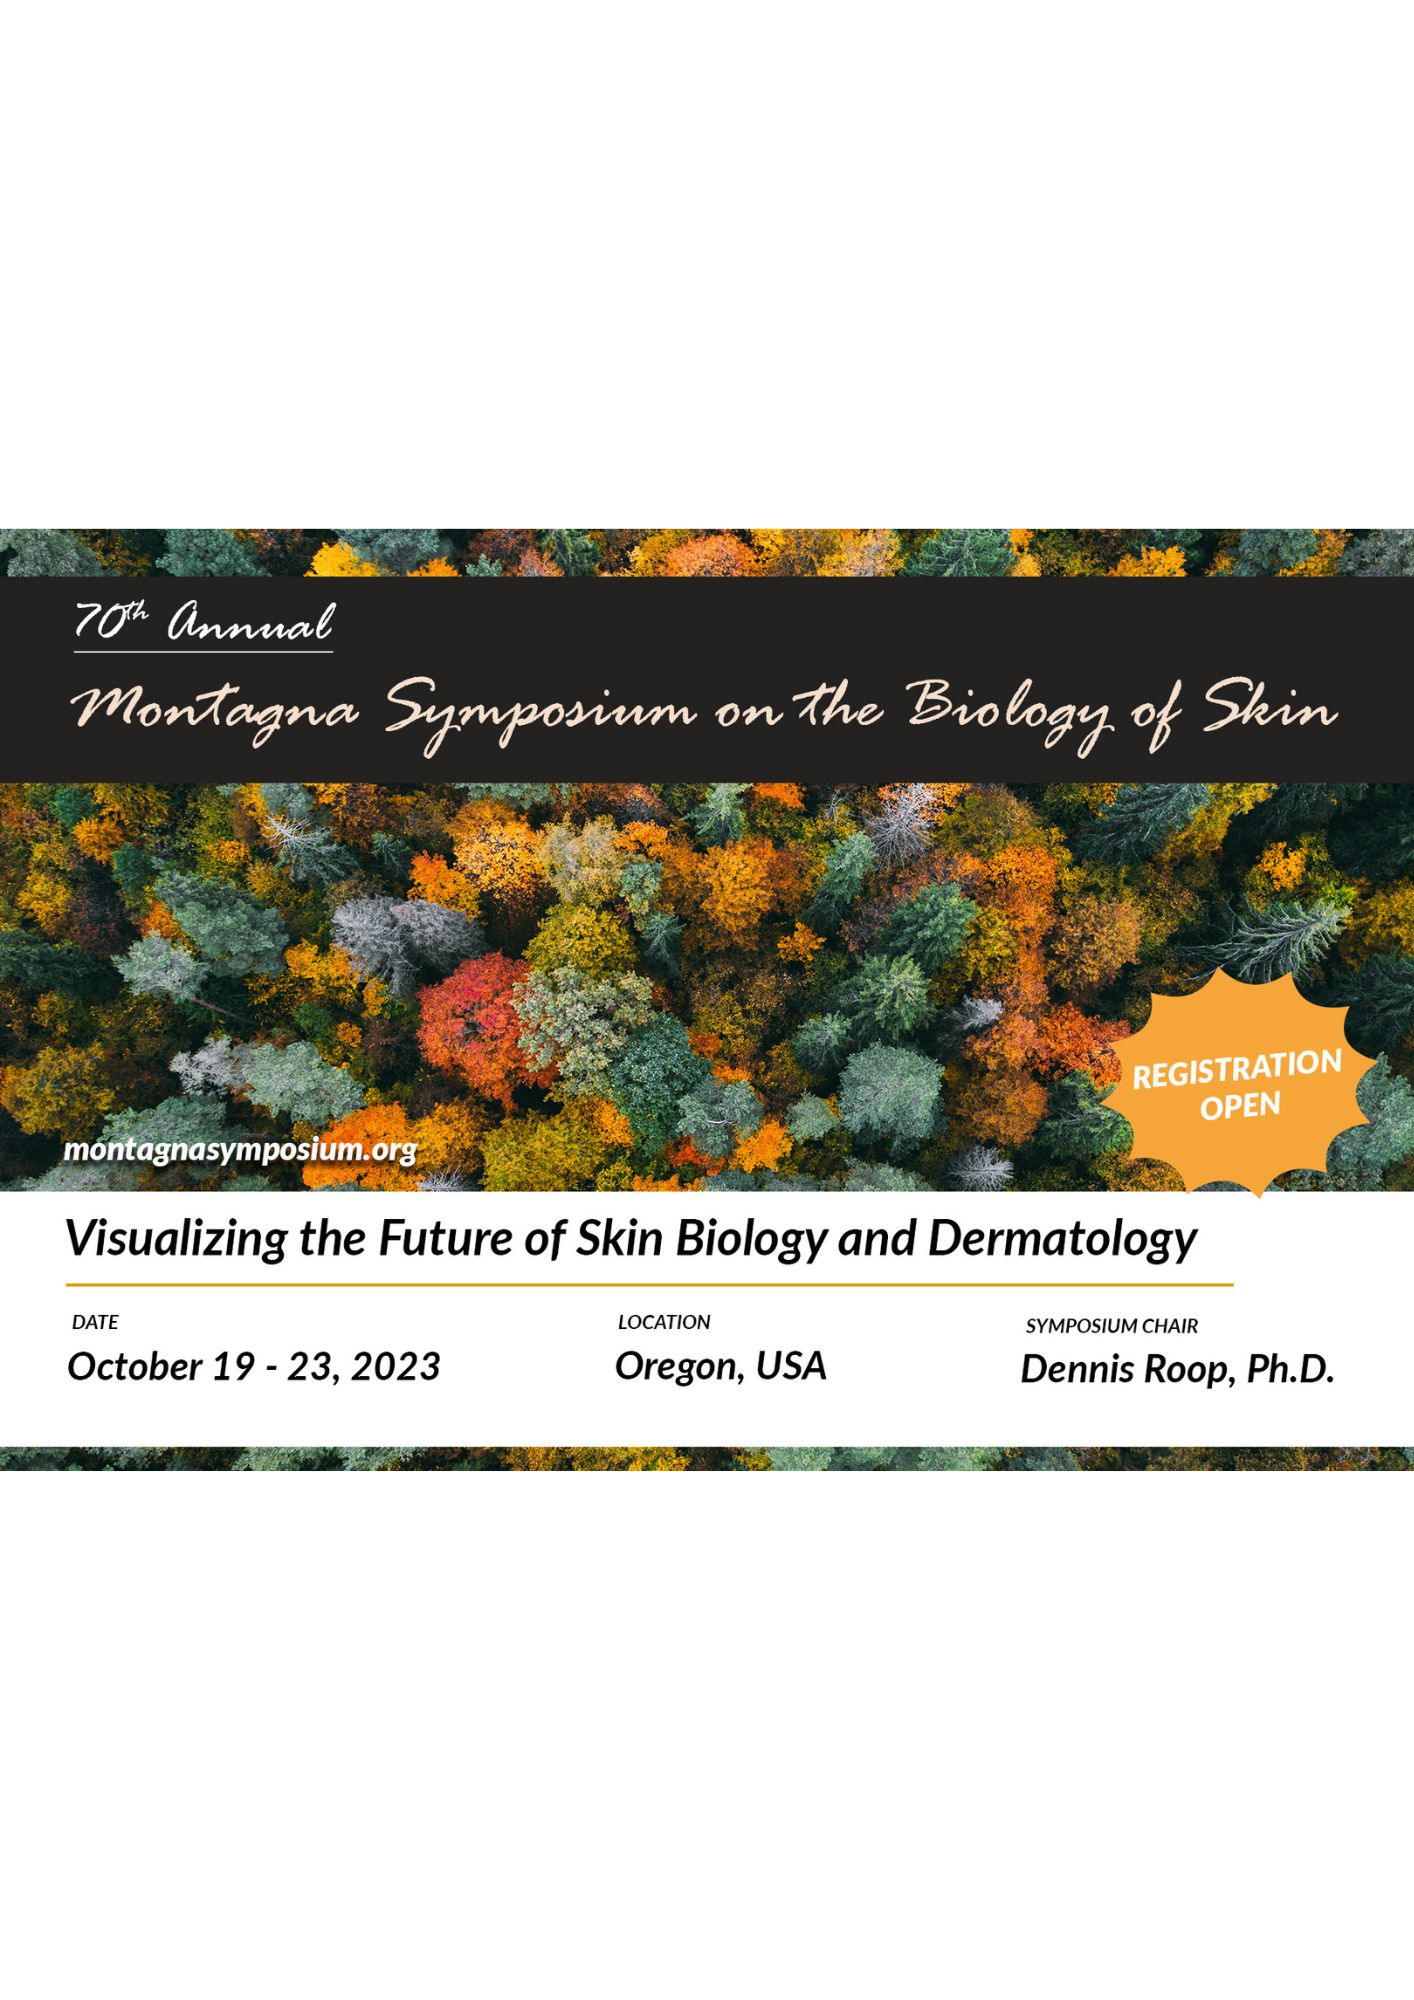 70th anniversary Montagna Symposium on the Biology of Skin